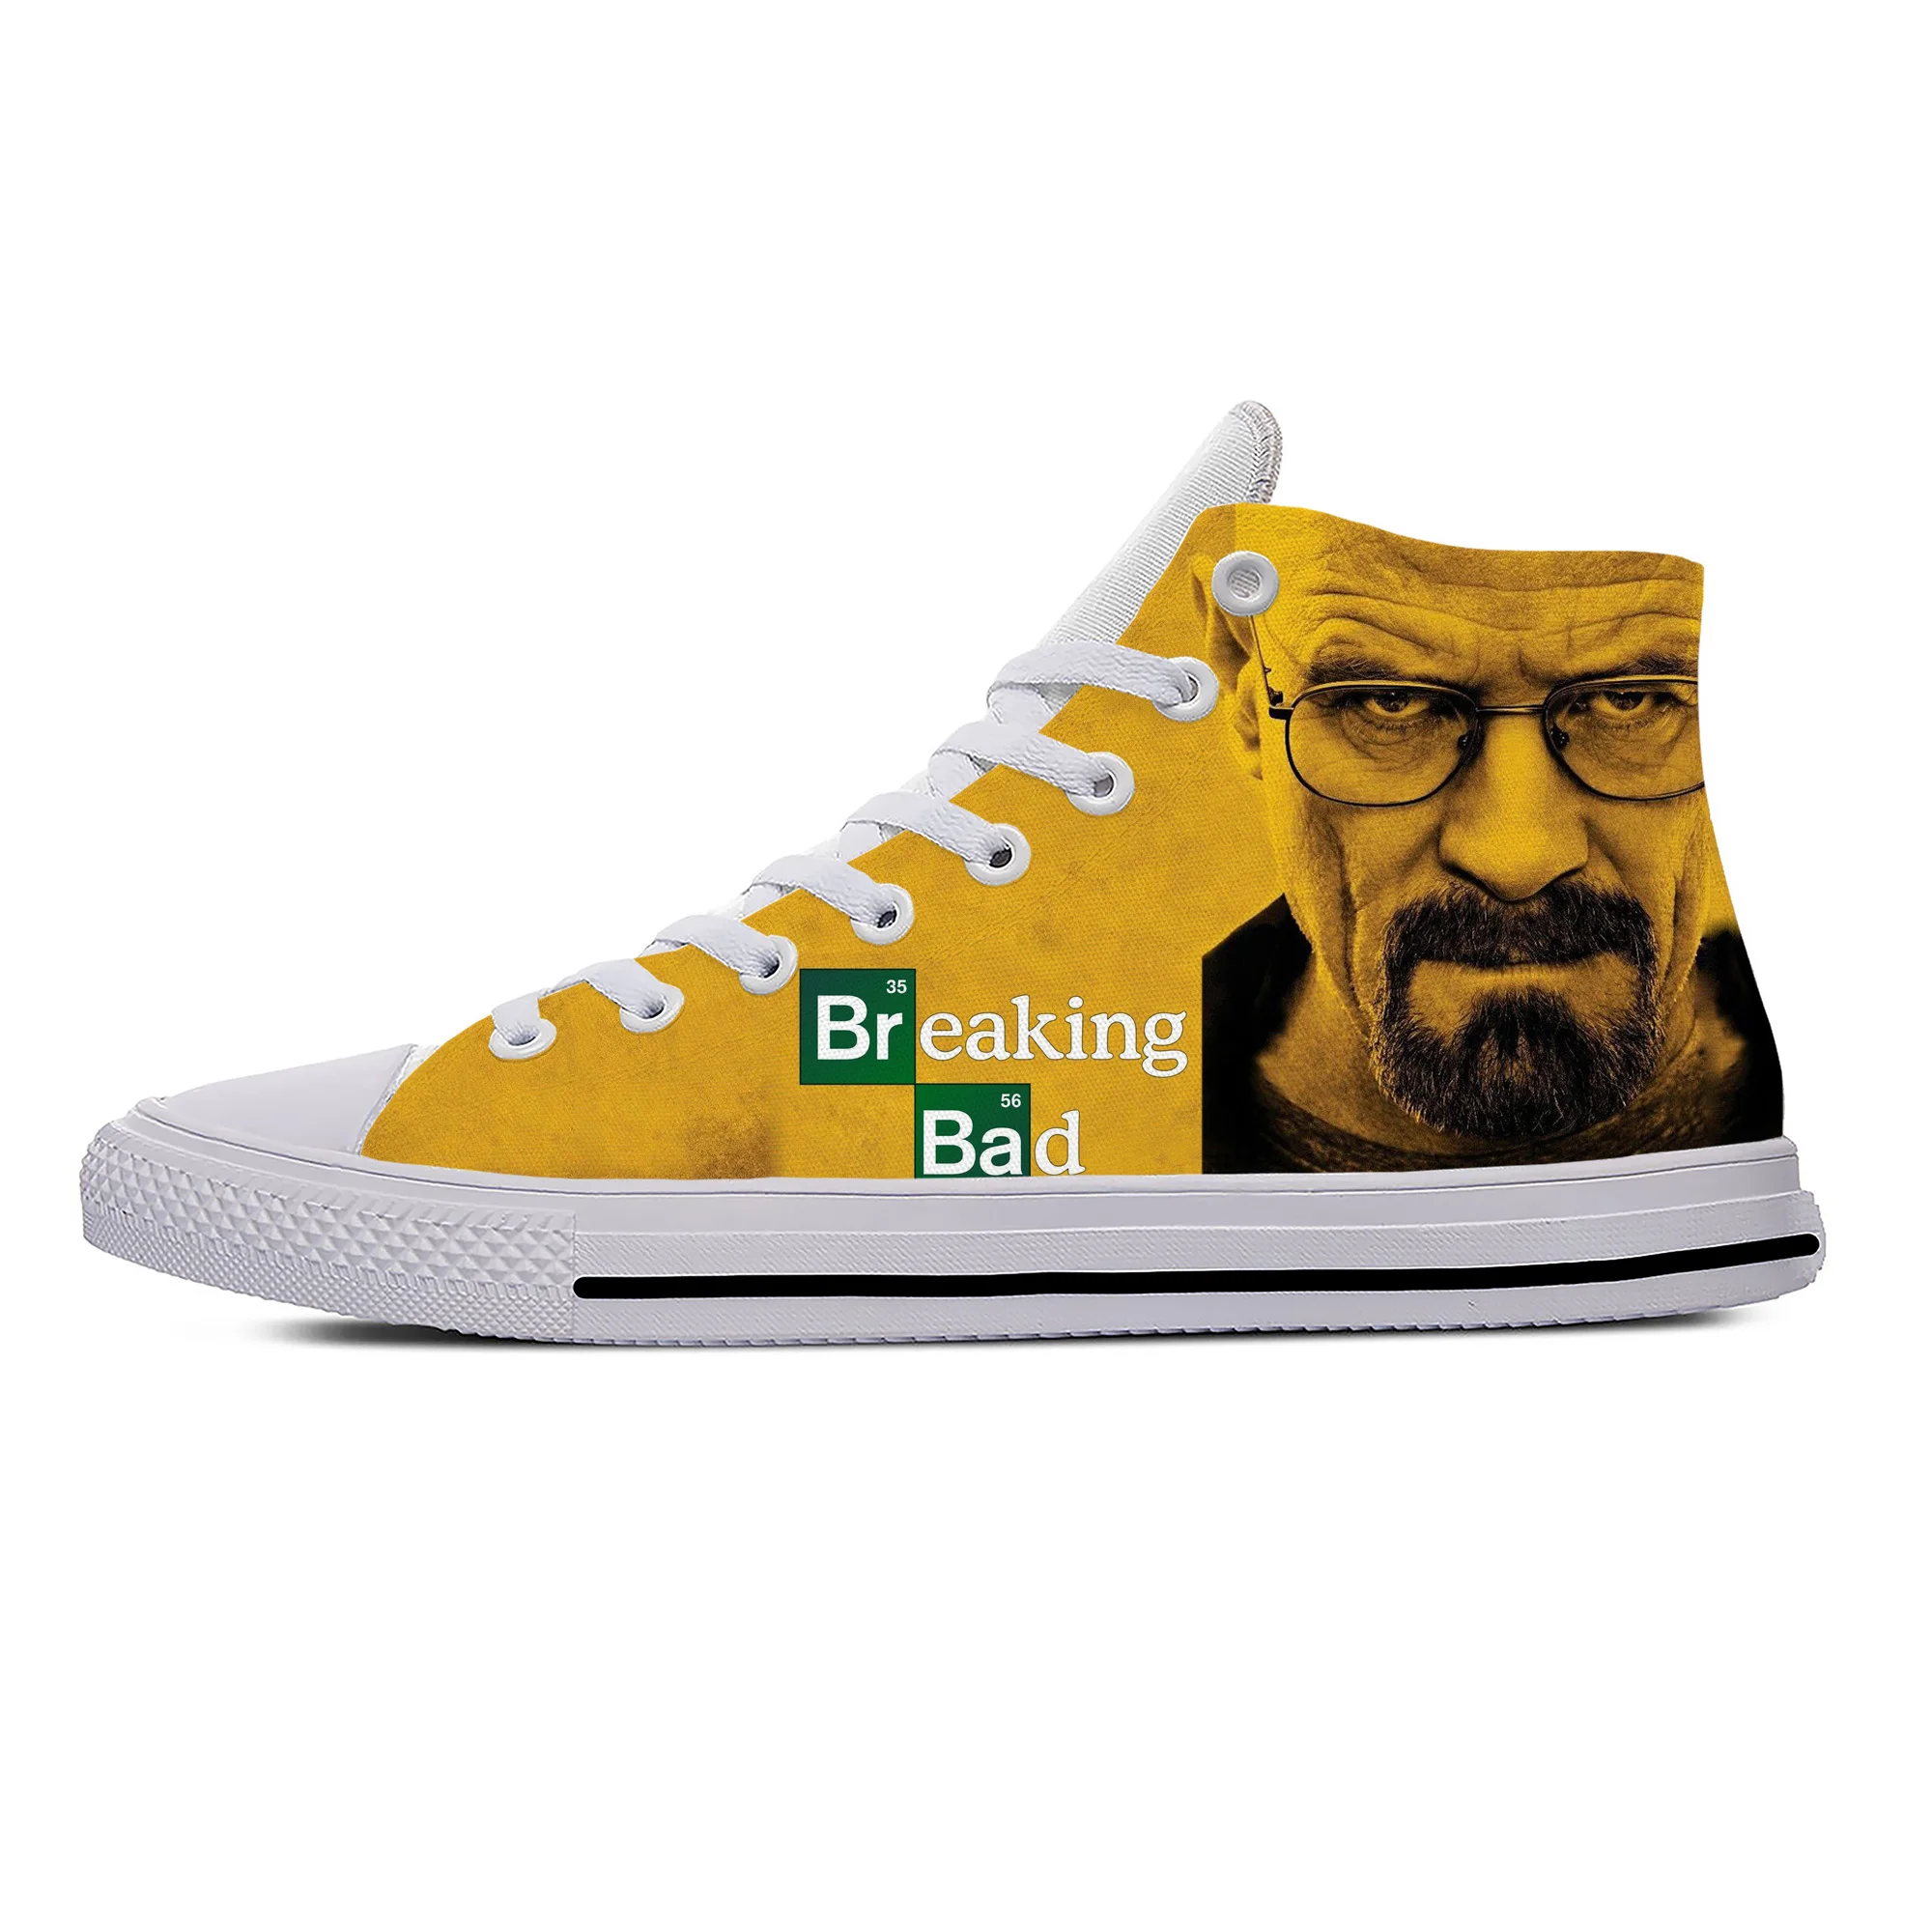 

Movie Breaking Bad High Top Sneakers Mens Womens Teenager Casual Shoes Canvas Running Shoes 3D Print Breathable Lightweight shoe